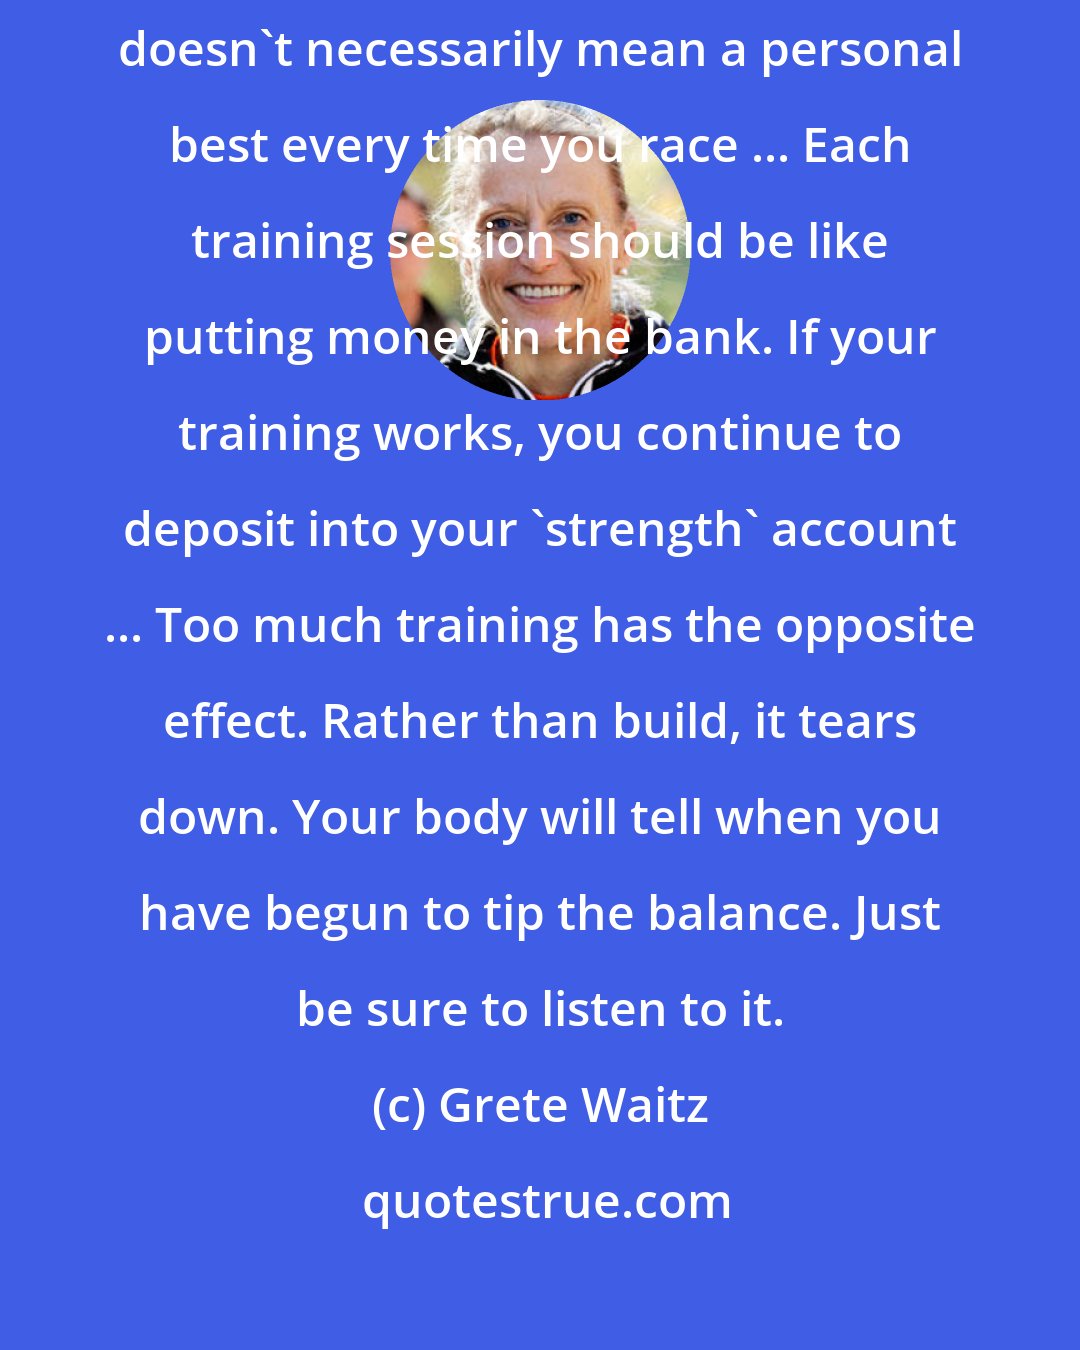 Grete Waitz: If you are training properly, you should progress steadily. This doesn't necessarily mean a personal best every time you race ... Each training session should be like putting money in the bank. If your training works, you continue to deposit into your 'strength' account ... Too much training has the opposite effect. Rather than build, it tears down. Your body will tell when you have begun to tip the balance. Just be sure to listen to it.